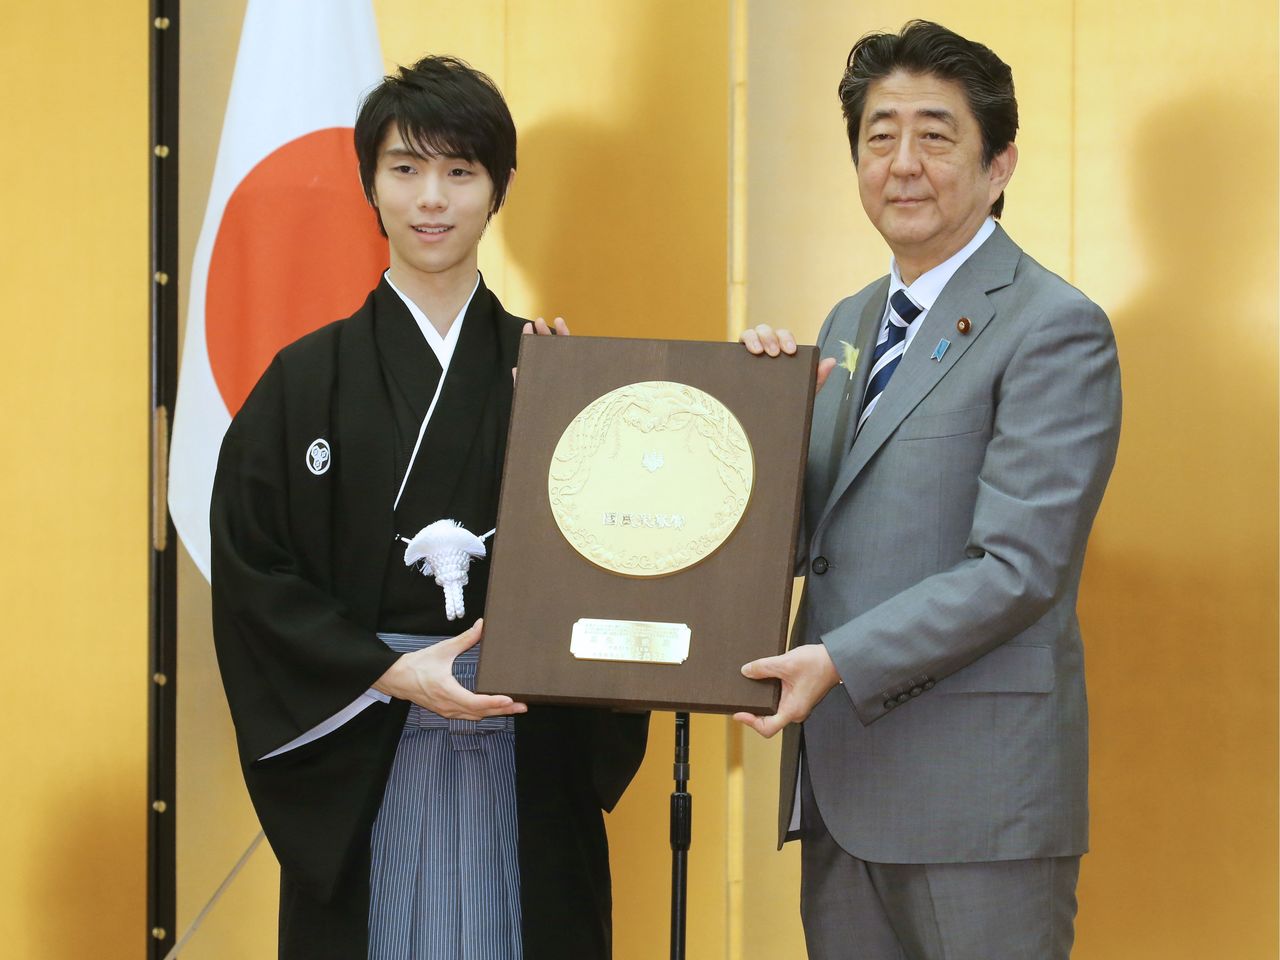 Hanyū Yuzuru (left) receives the People’s Honor Award from Prime Minister Abe Shinzō on July 2, 2018, for his achievement in winning successive gold medals at the Winter Olympics. (© Jiji)